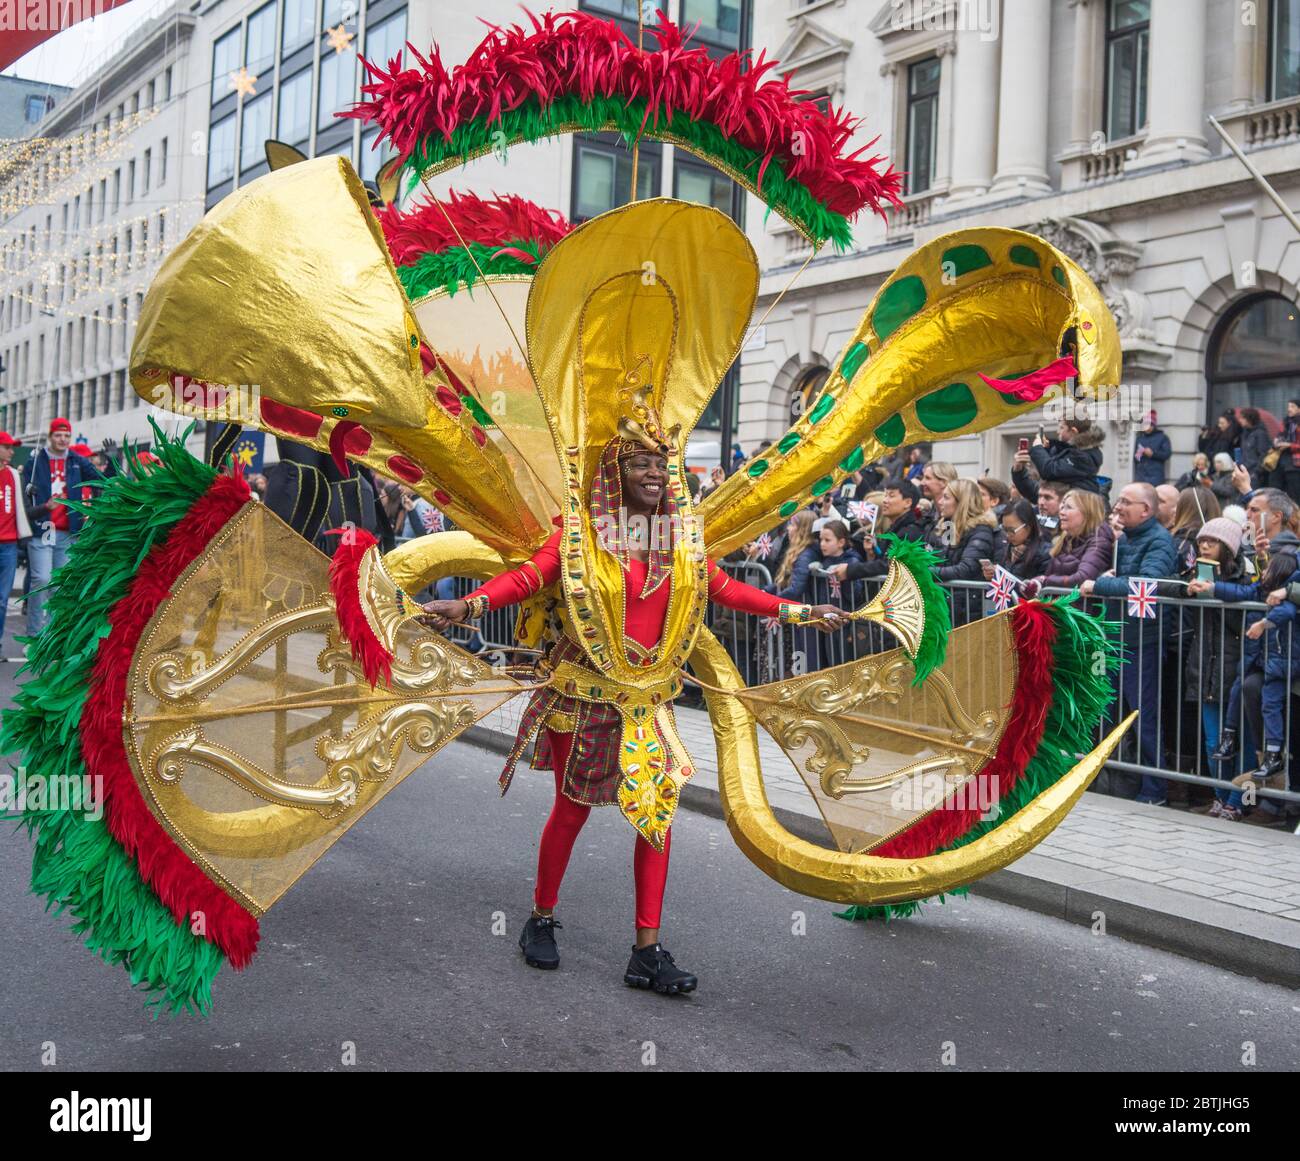 London New Year's DAY Parade 2020, man in large red, green and yellow carnival costume. Stock Photo